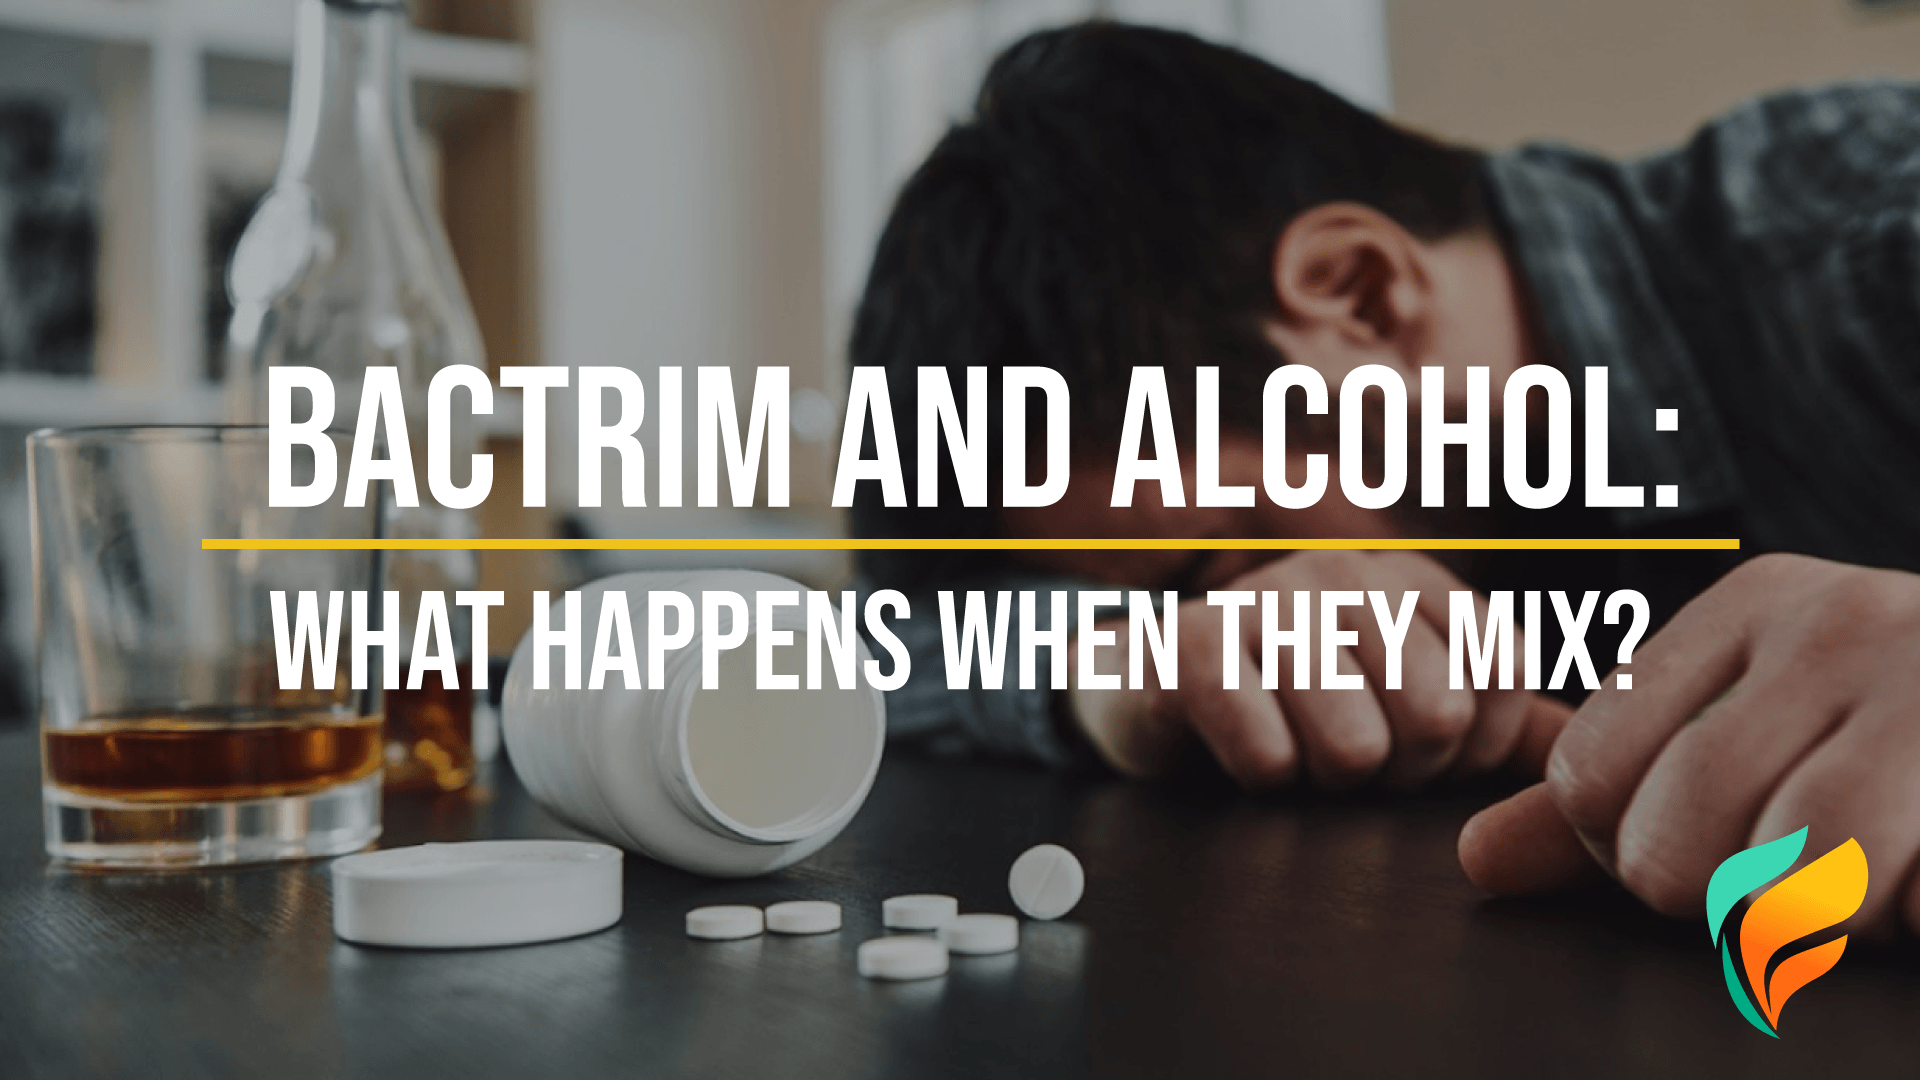 Bactrim and Alcohol: Facts & More